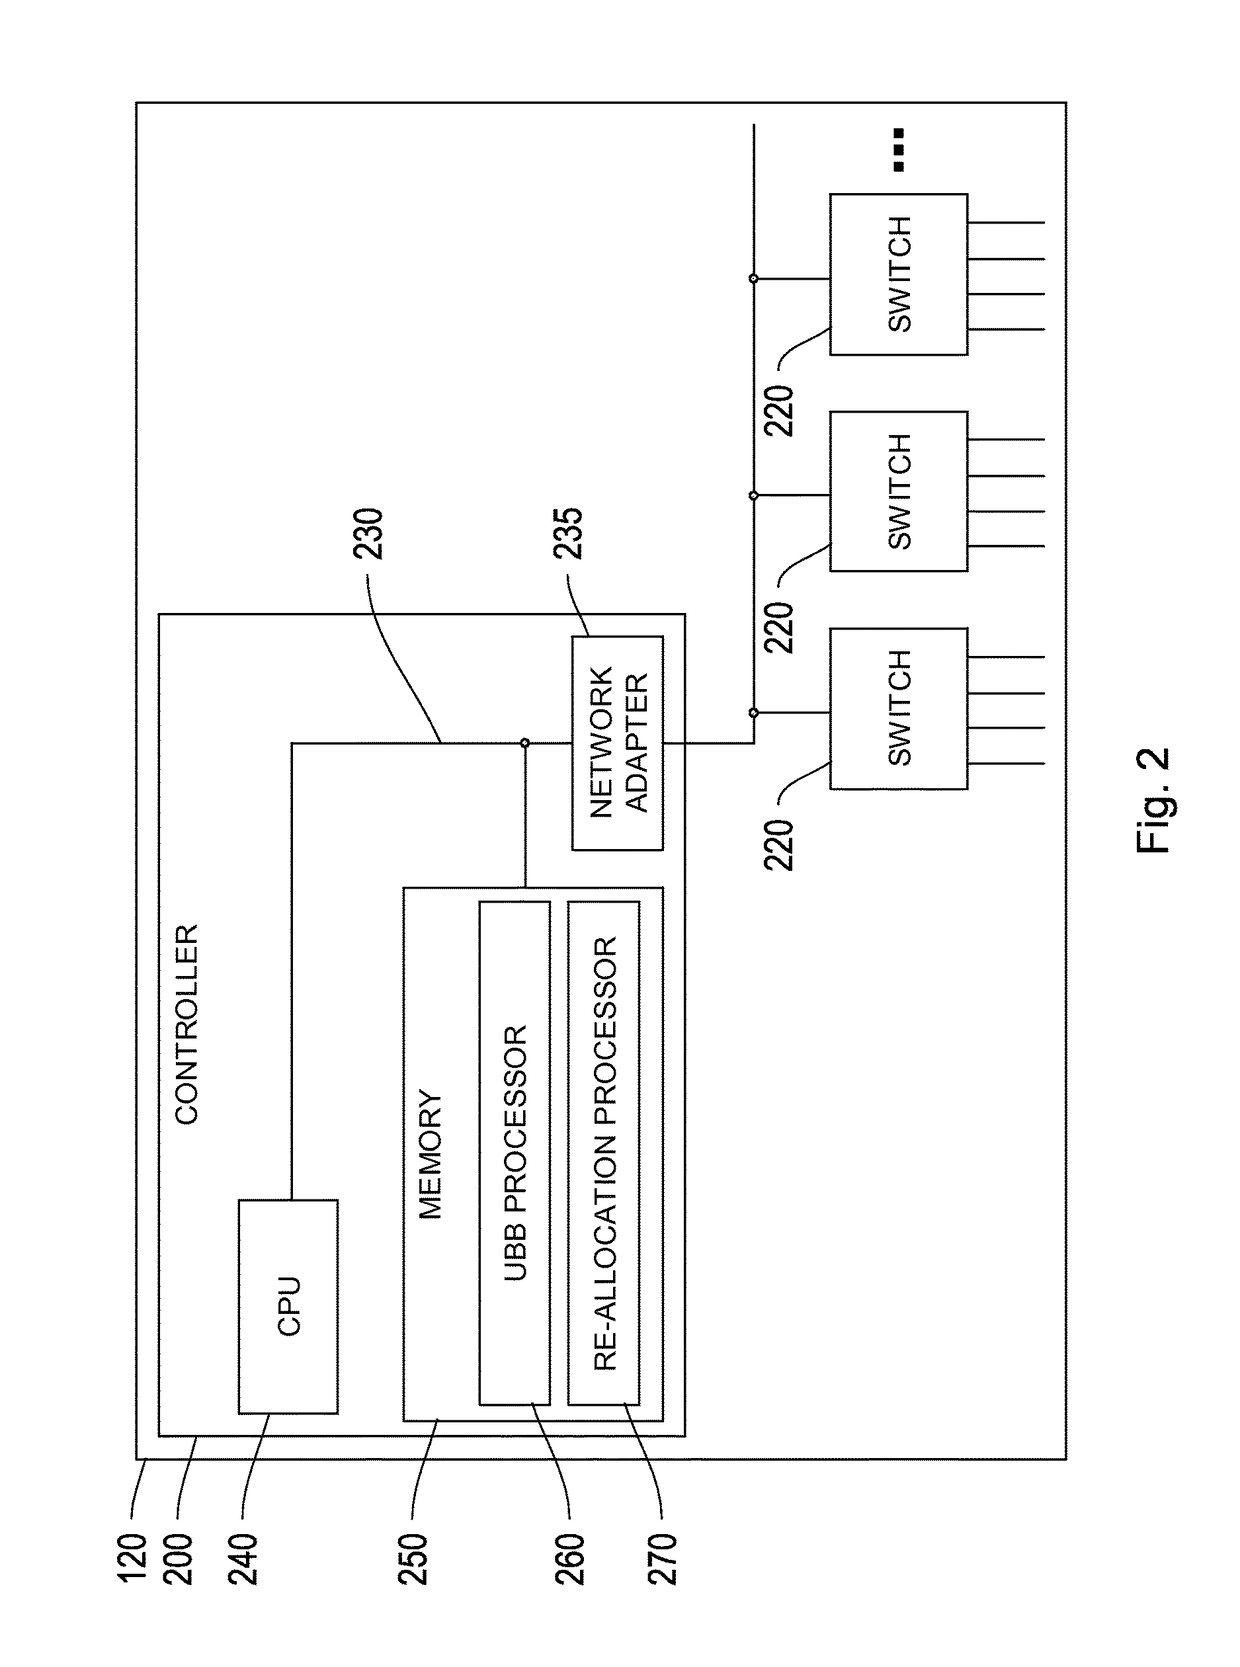 System and methods for utilization-based balancing of traffic to an information retrieval system